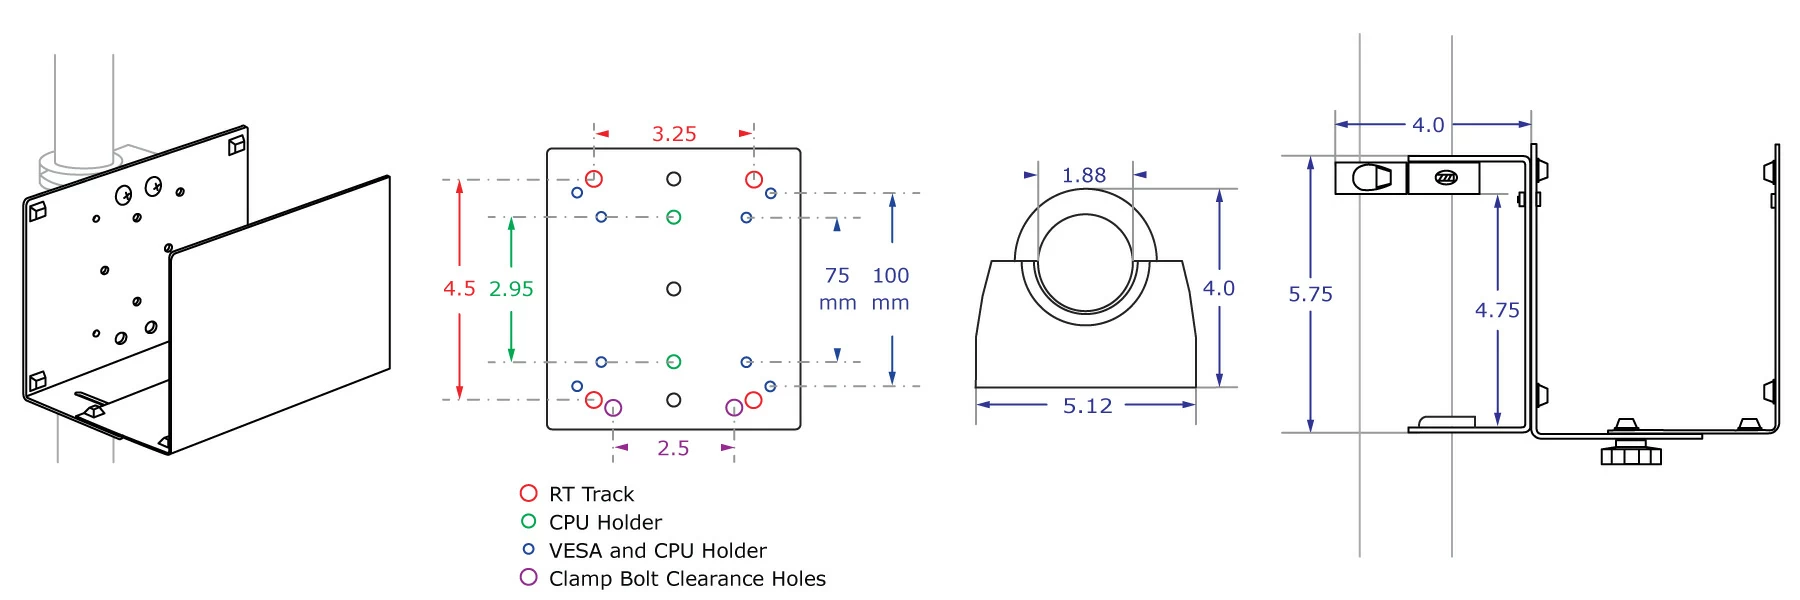 CPU holder specification drawings for pole mount components